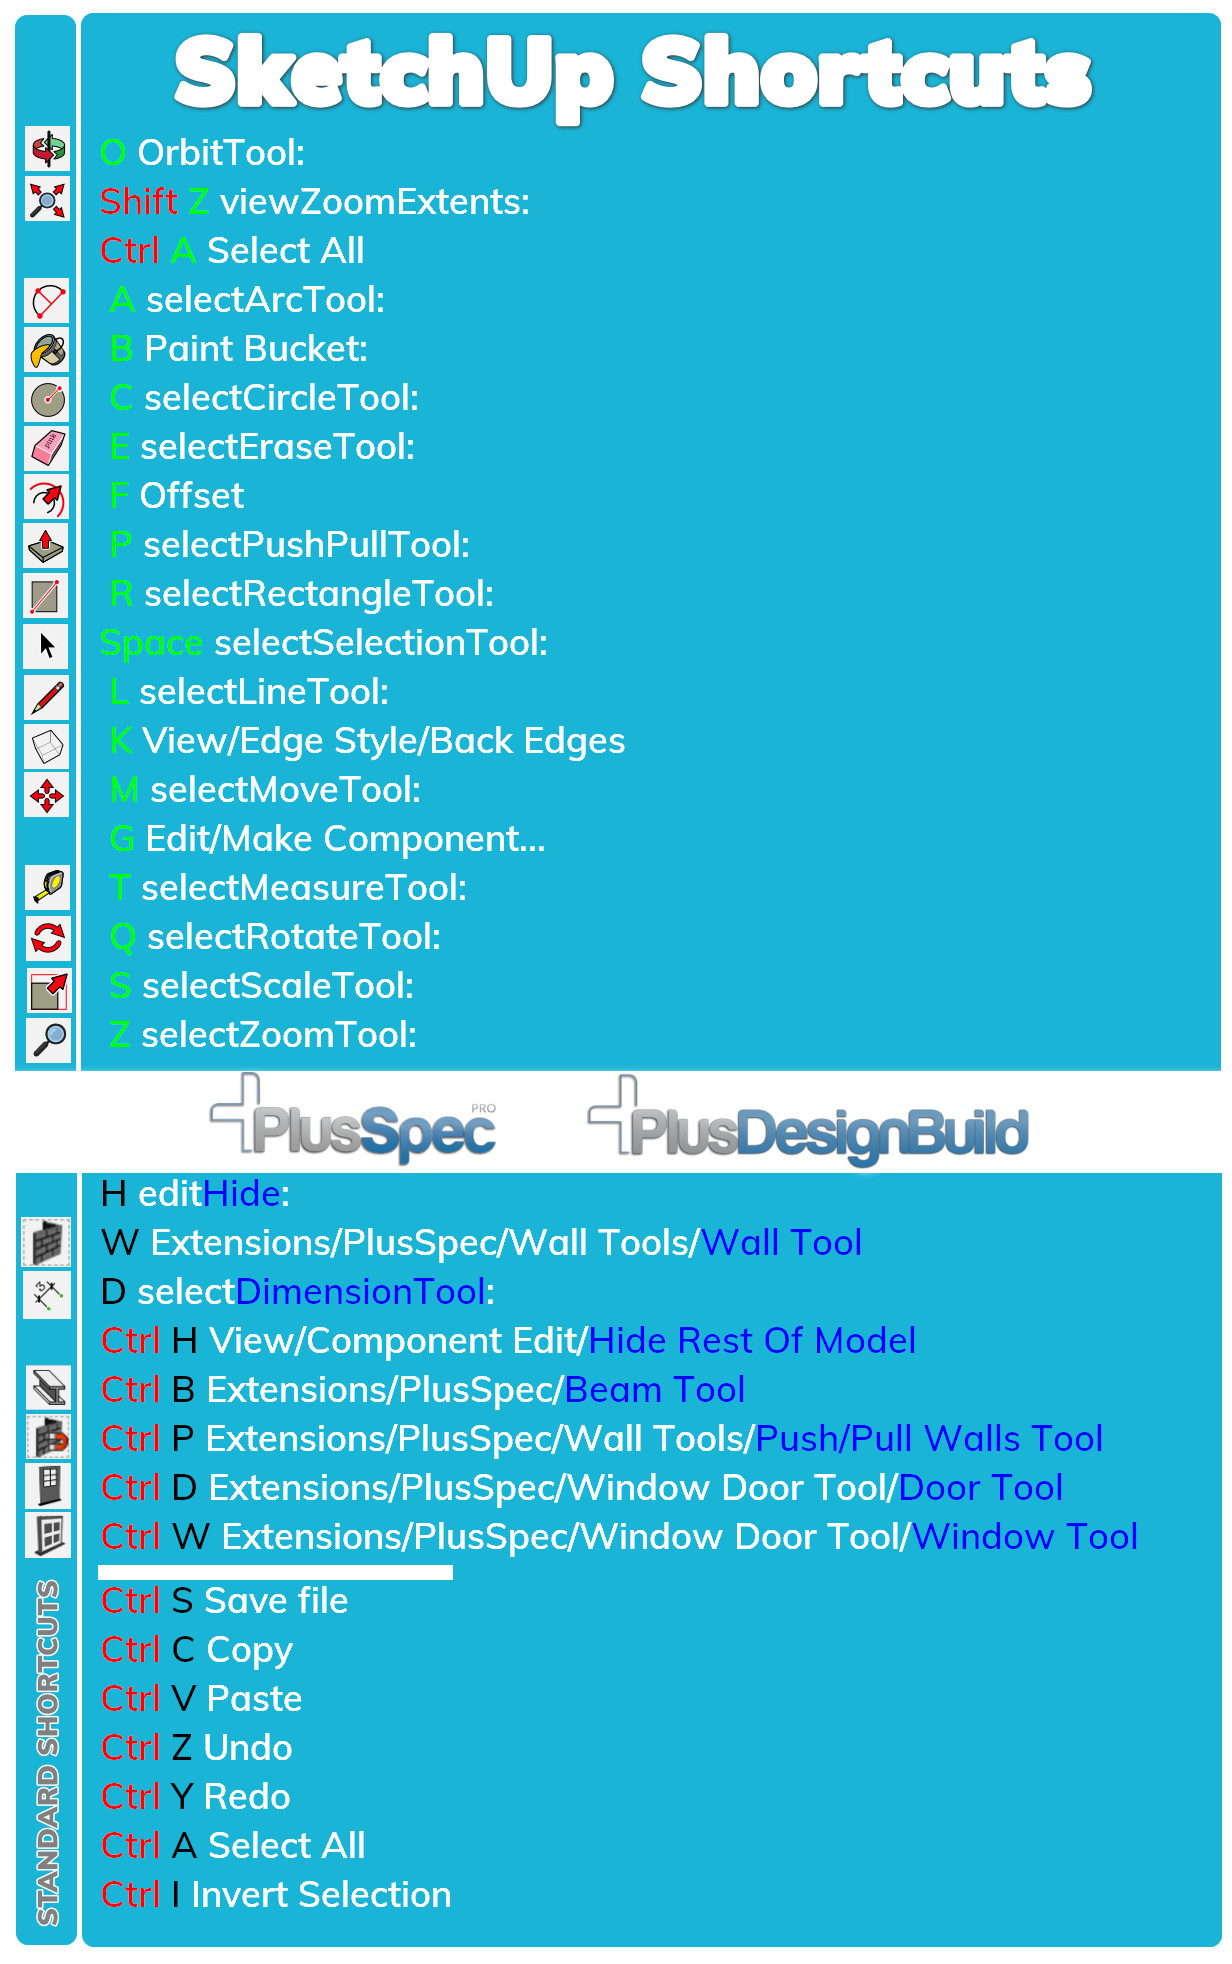 Sketchup Keyboard Shortcust and PlusSpec  PlusDesignBuild recomended shortucts.jpg